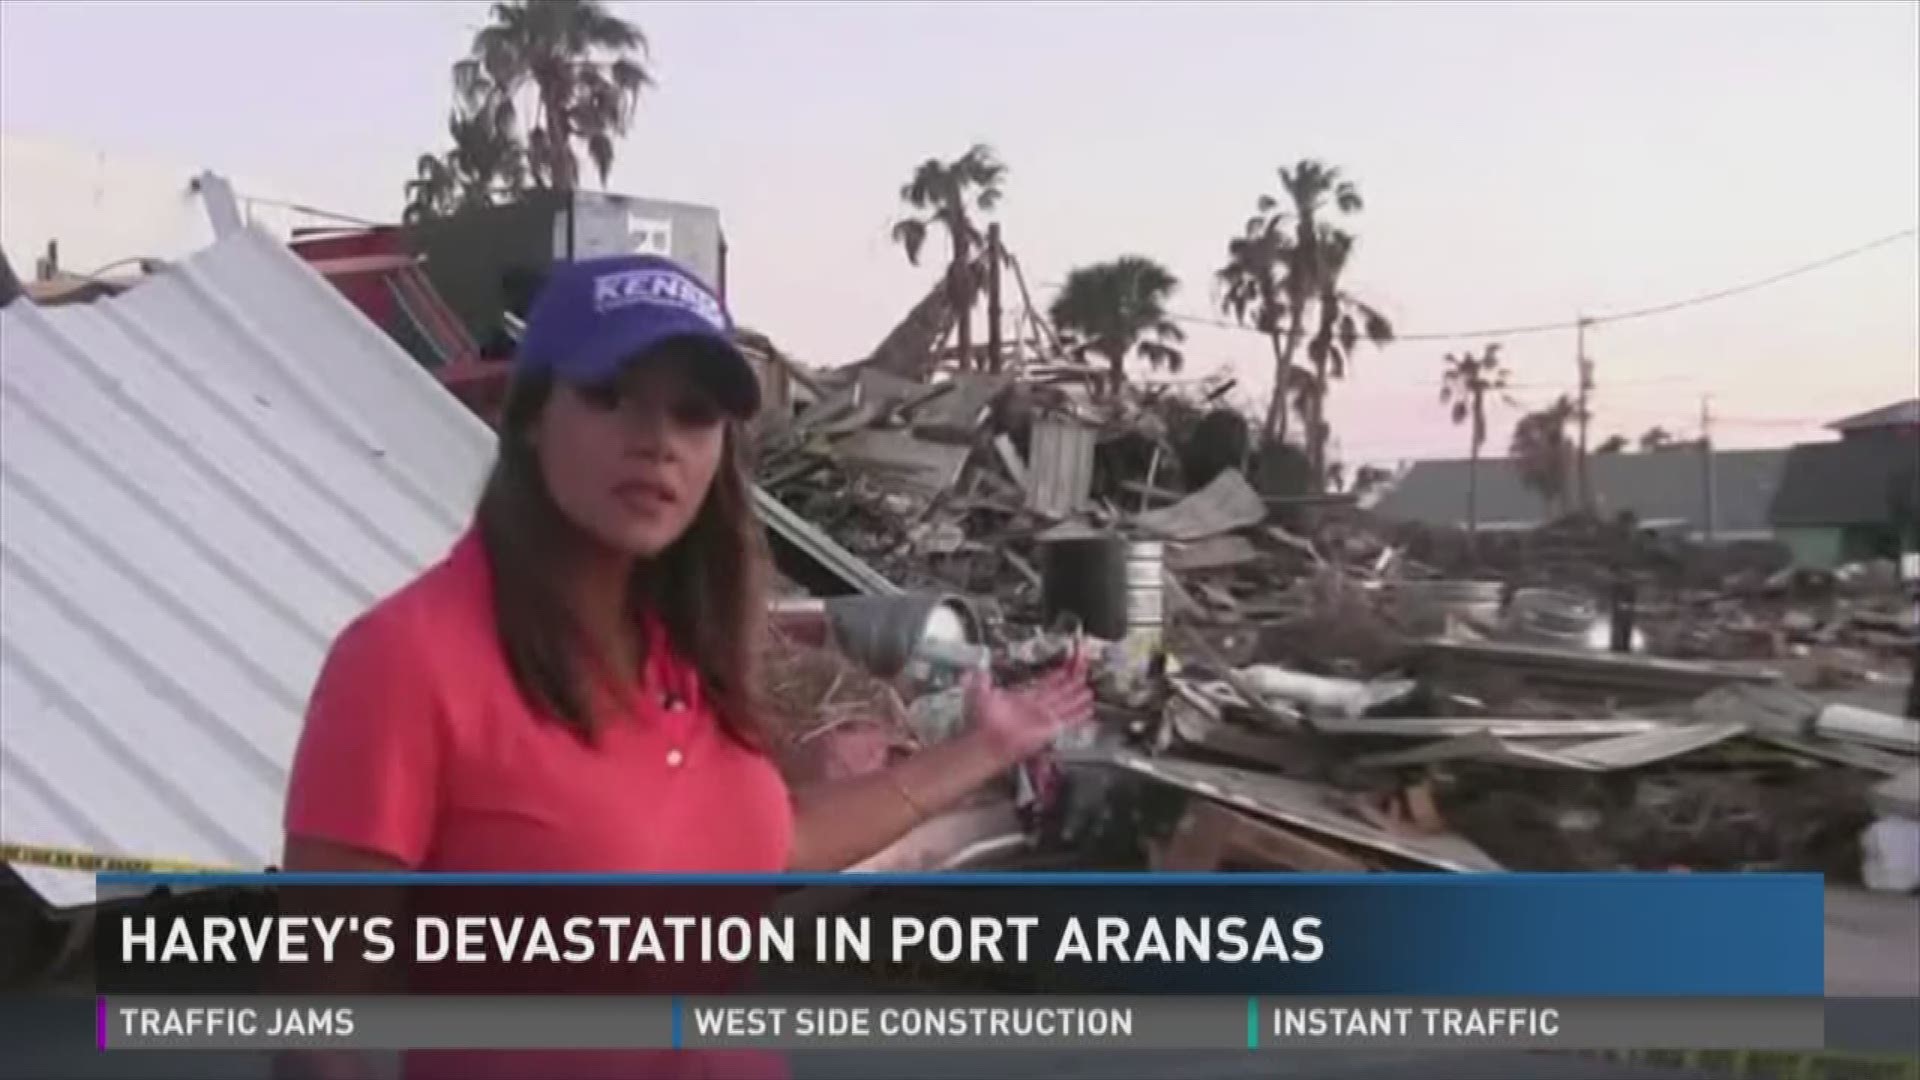 KENS 5 takes a look at the damage and destruction left behind by Hurricane Harvey in Port Aransas and the plans to rebuild.